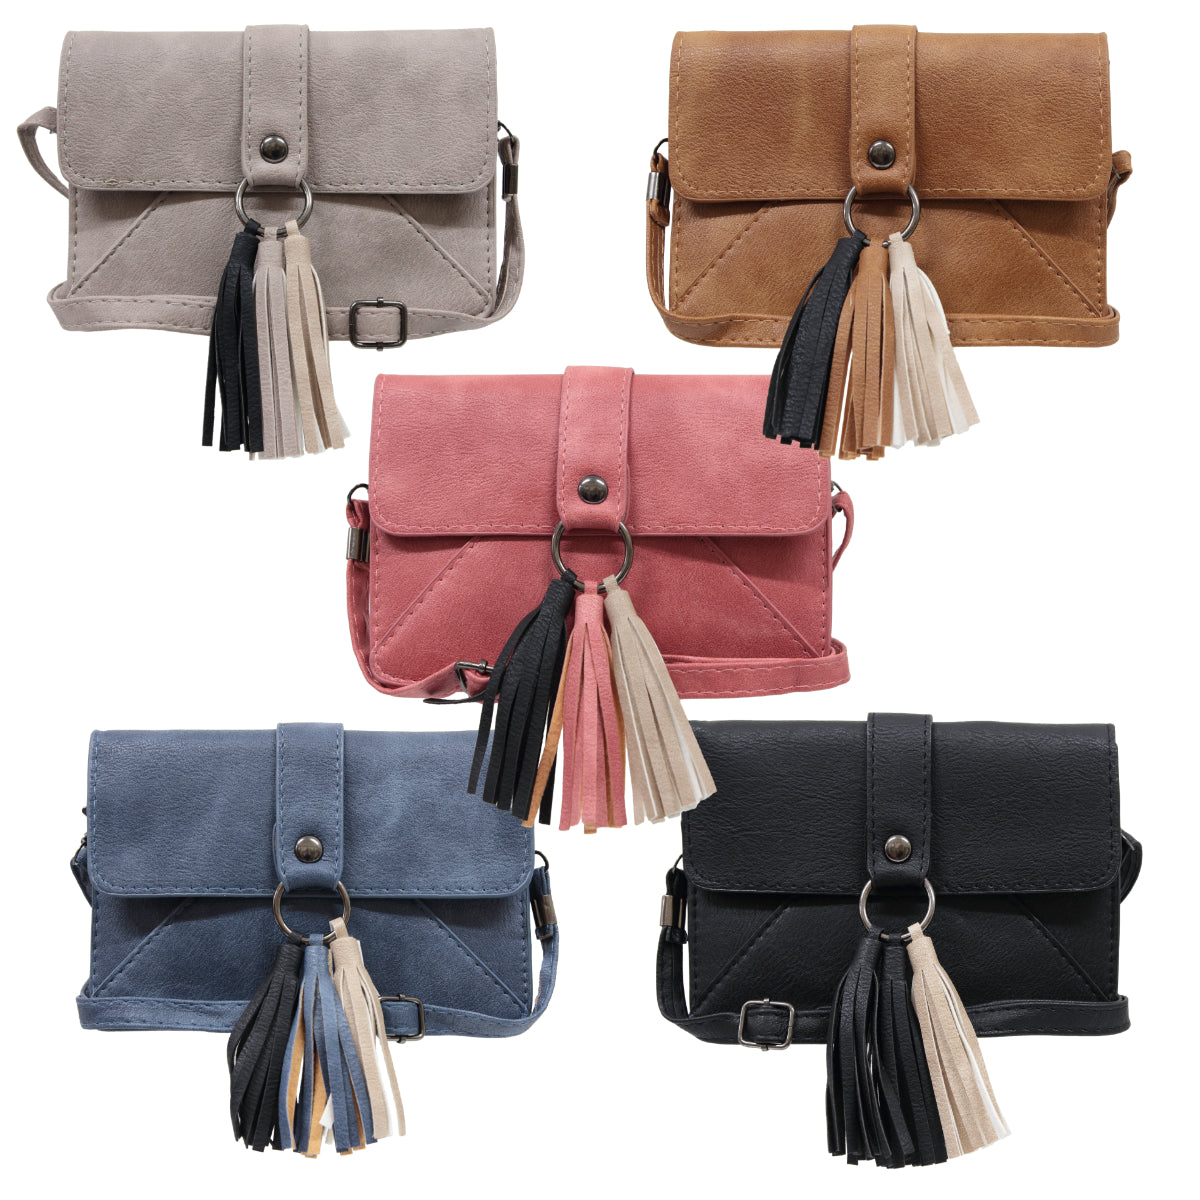 Clementine Front Flap Body Pouch Bag with Metal Ring detail and three Tassels 19cm W x 3.5cm D x 13cm H in various colors